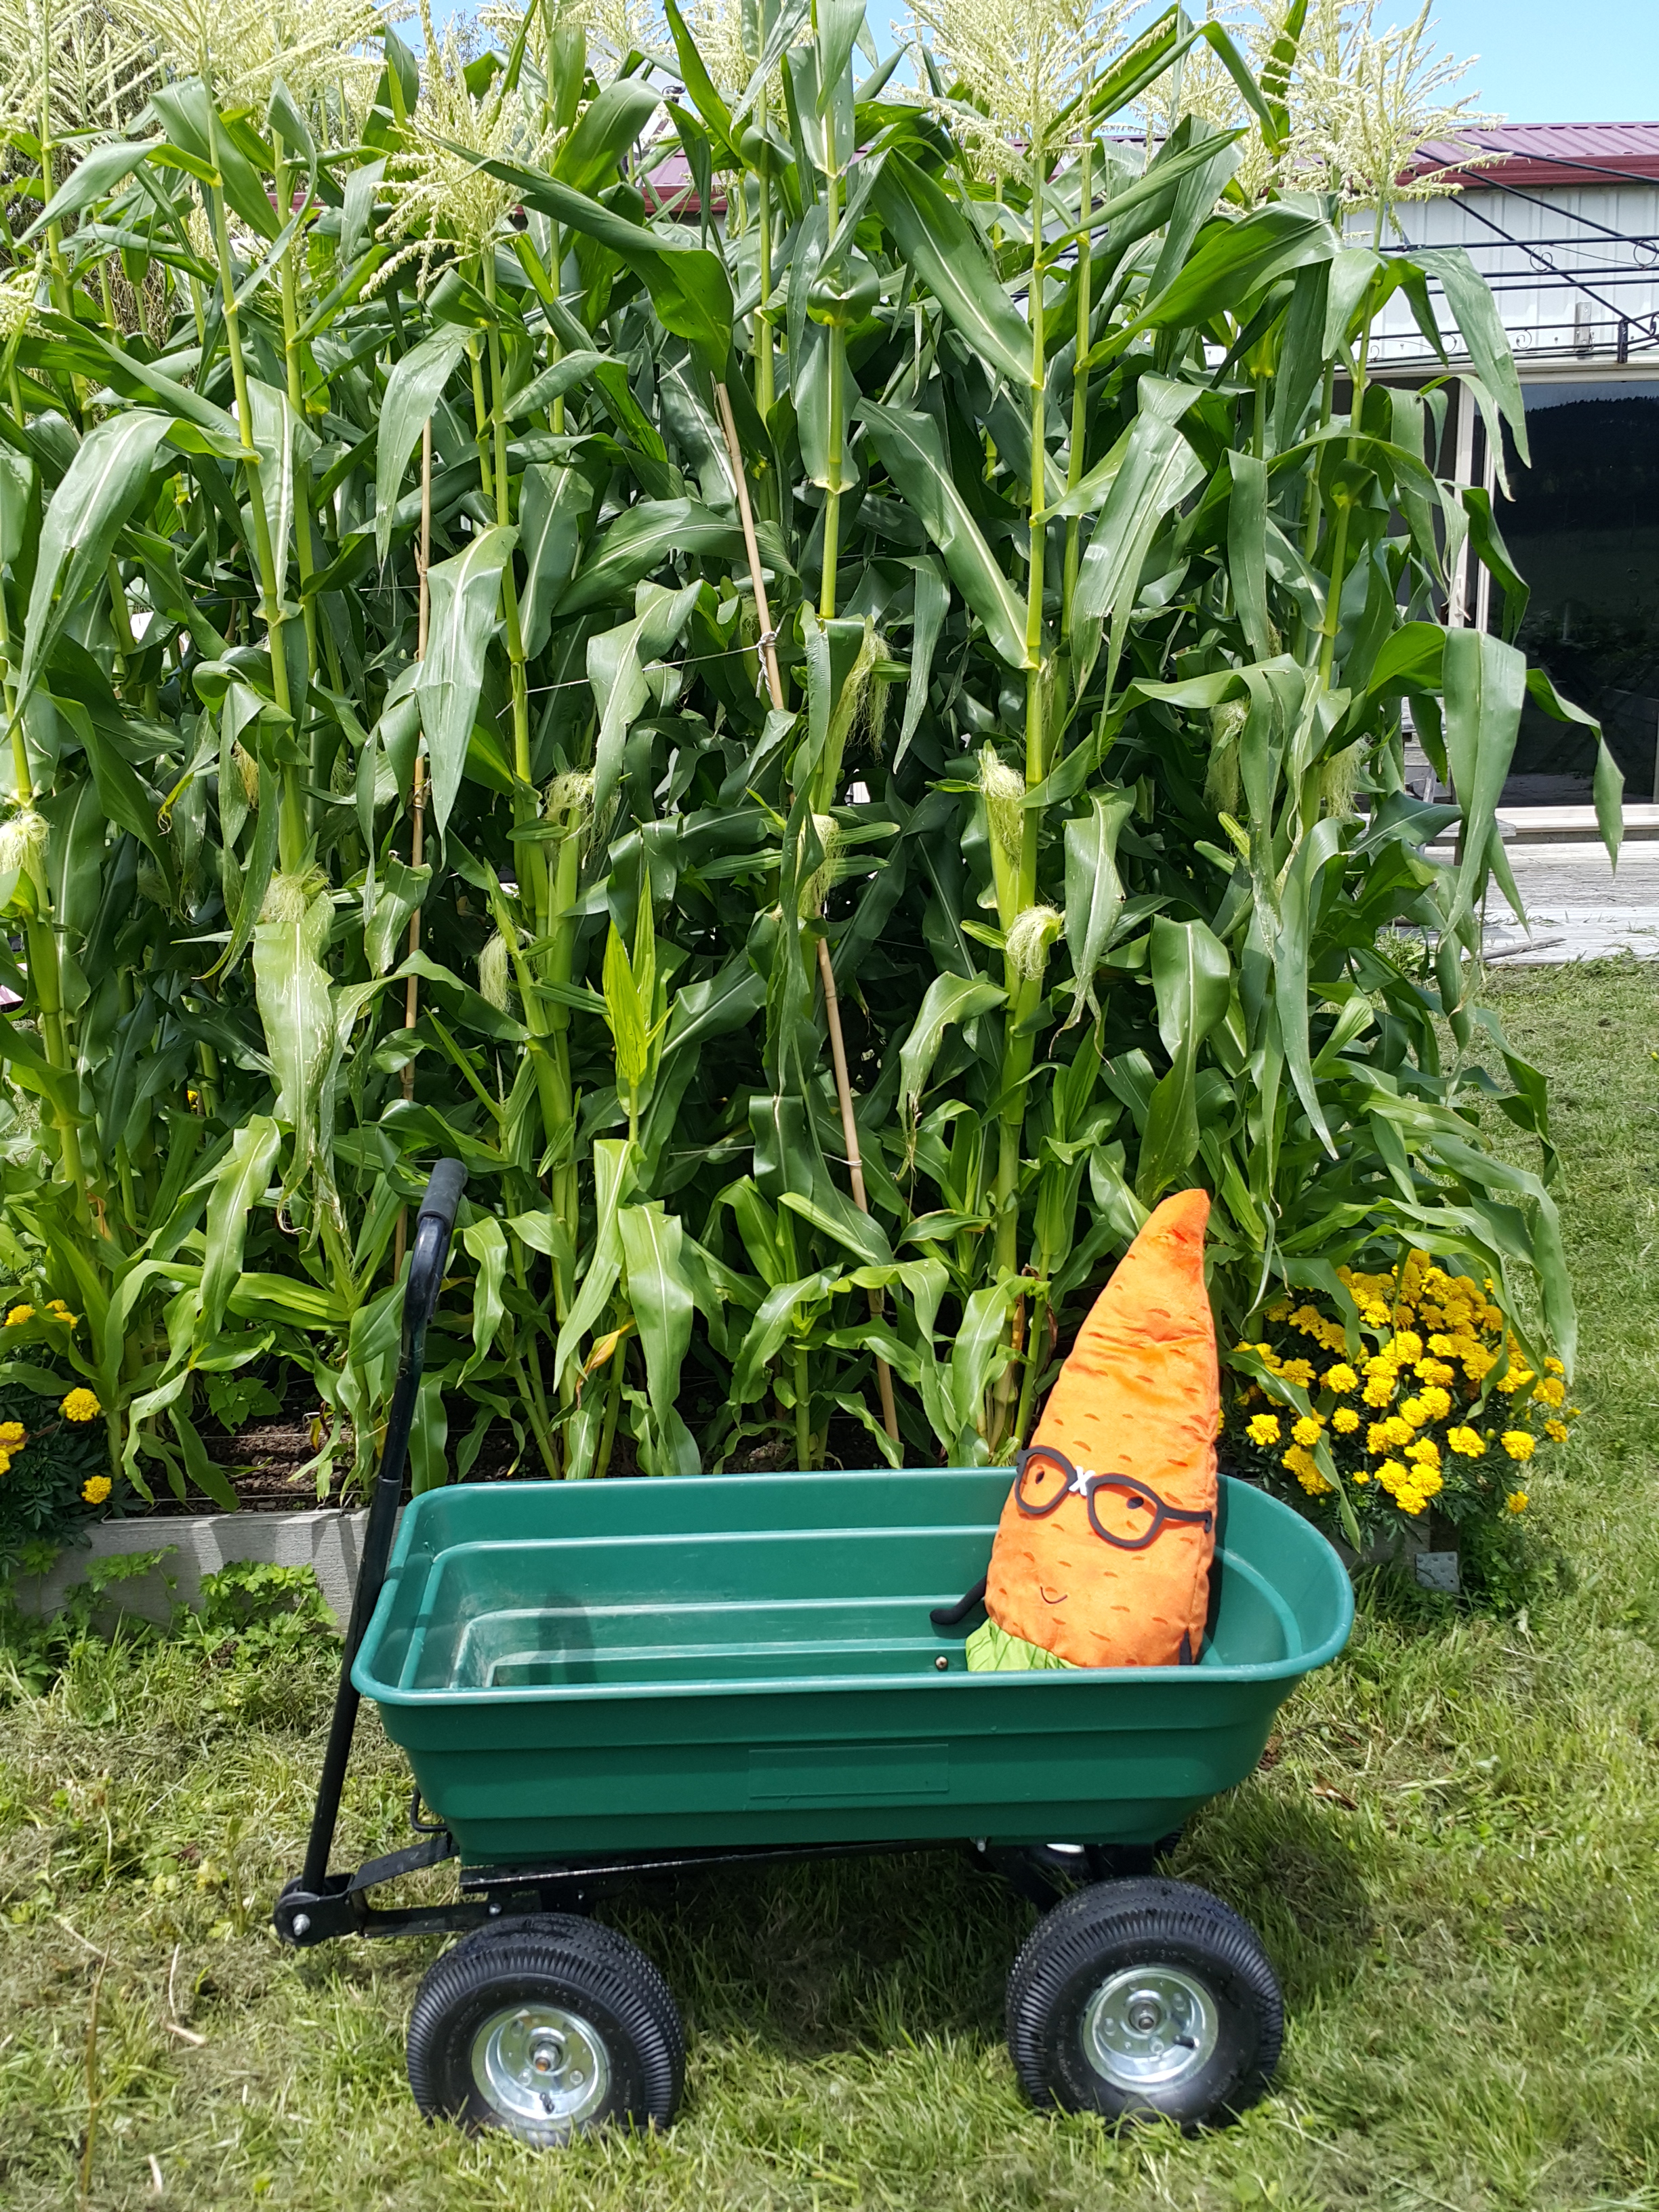 Sarah took Mr. Nerd for a spin around the corn patch. 